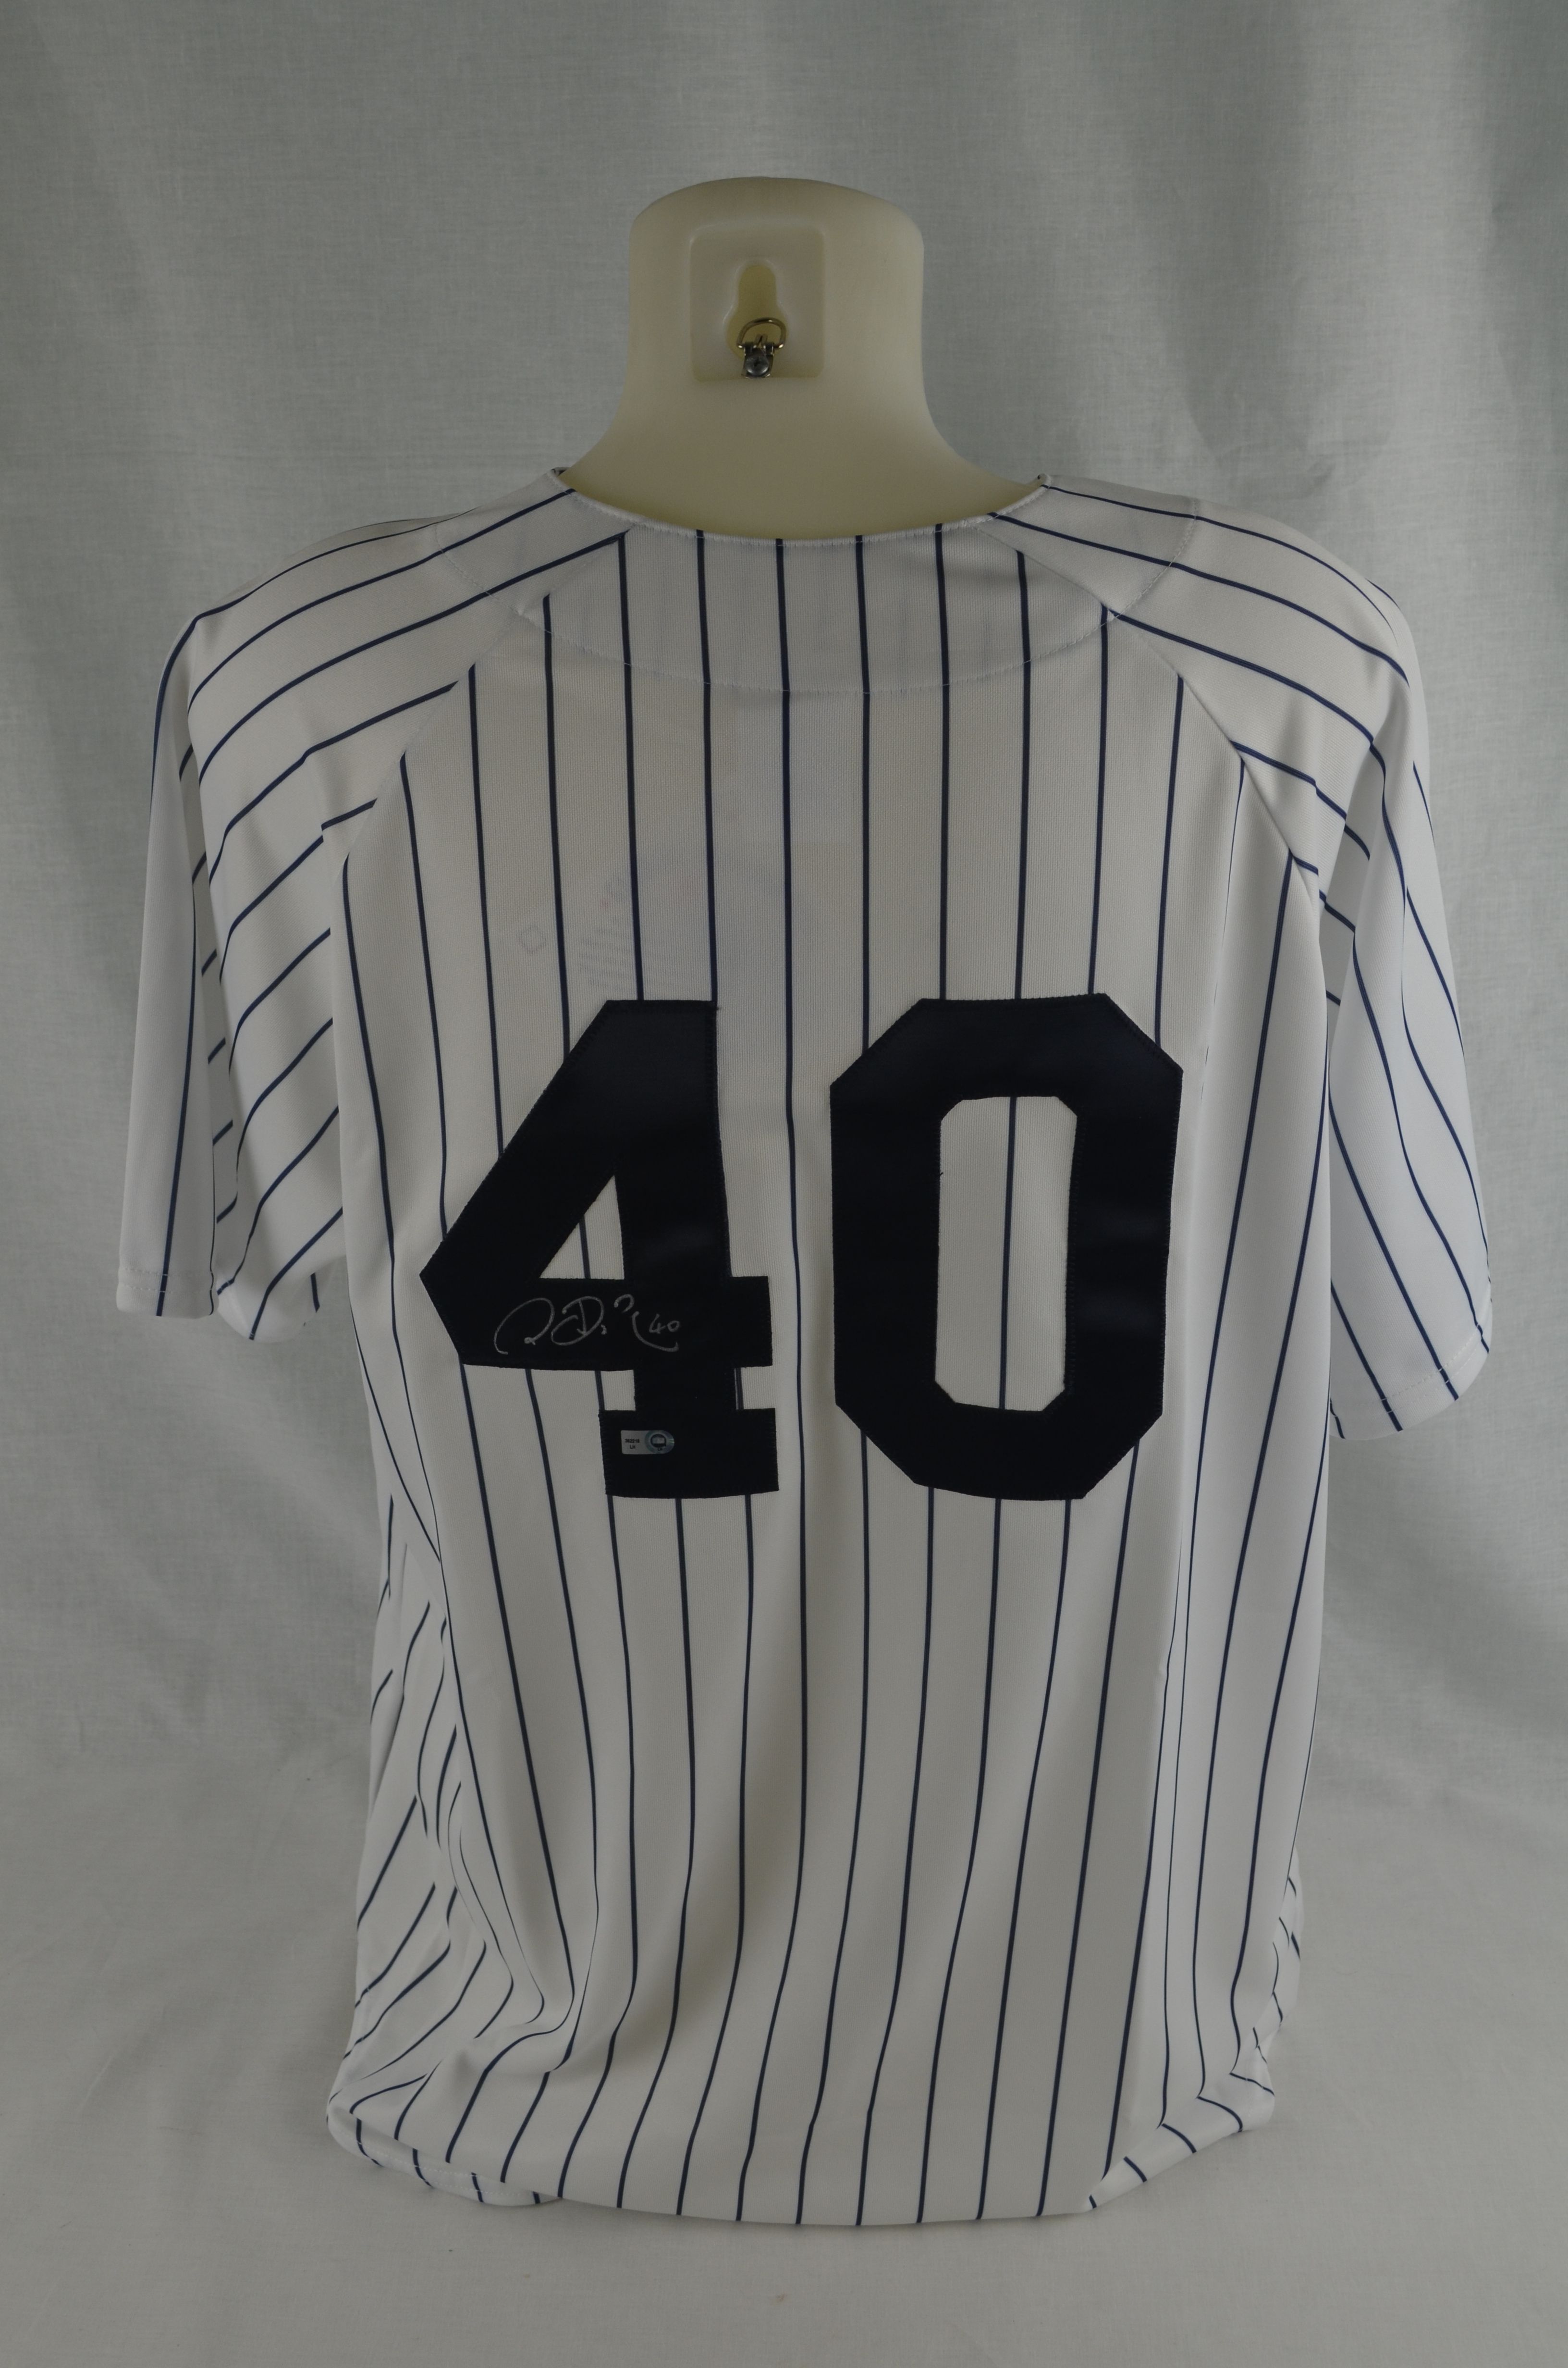 Lot Detail - Chien Ming Wang Autographed New York Yankees Jersey